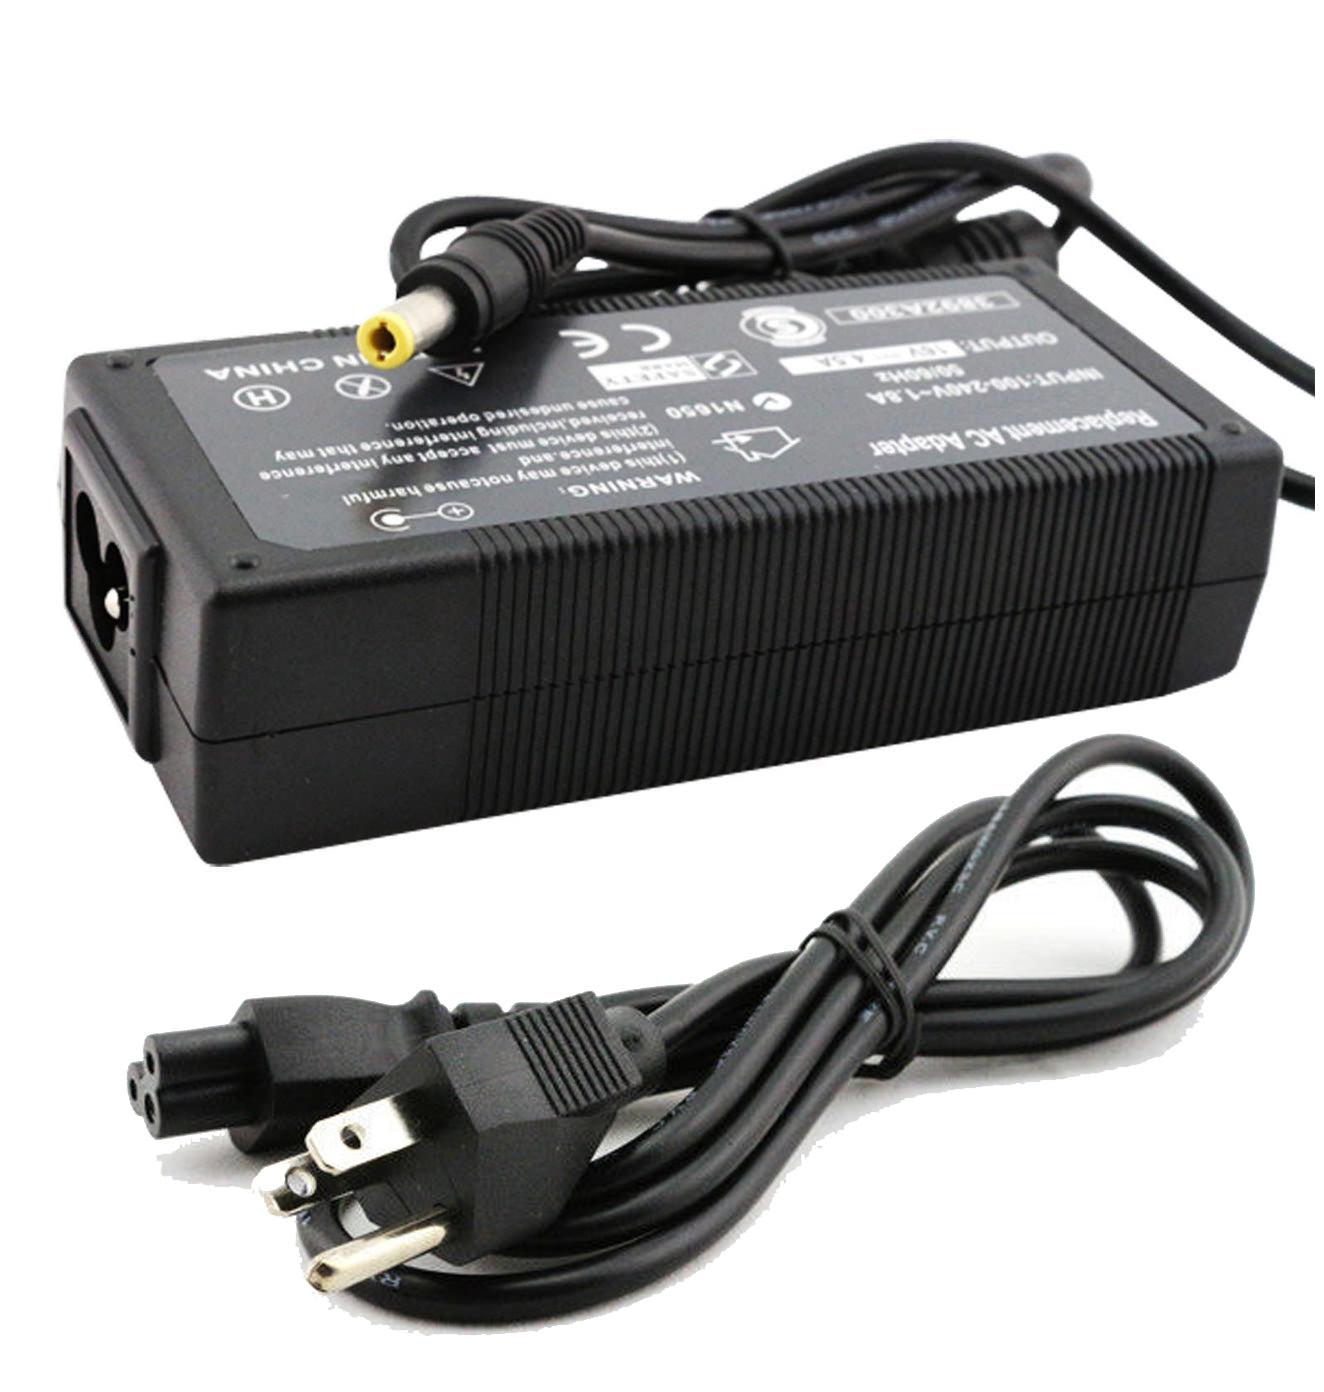 AC Adapter Charger for IBM ThinkPad 02K6816.